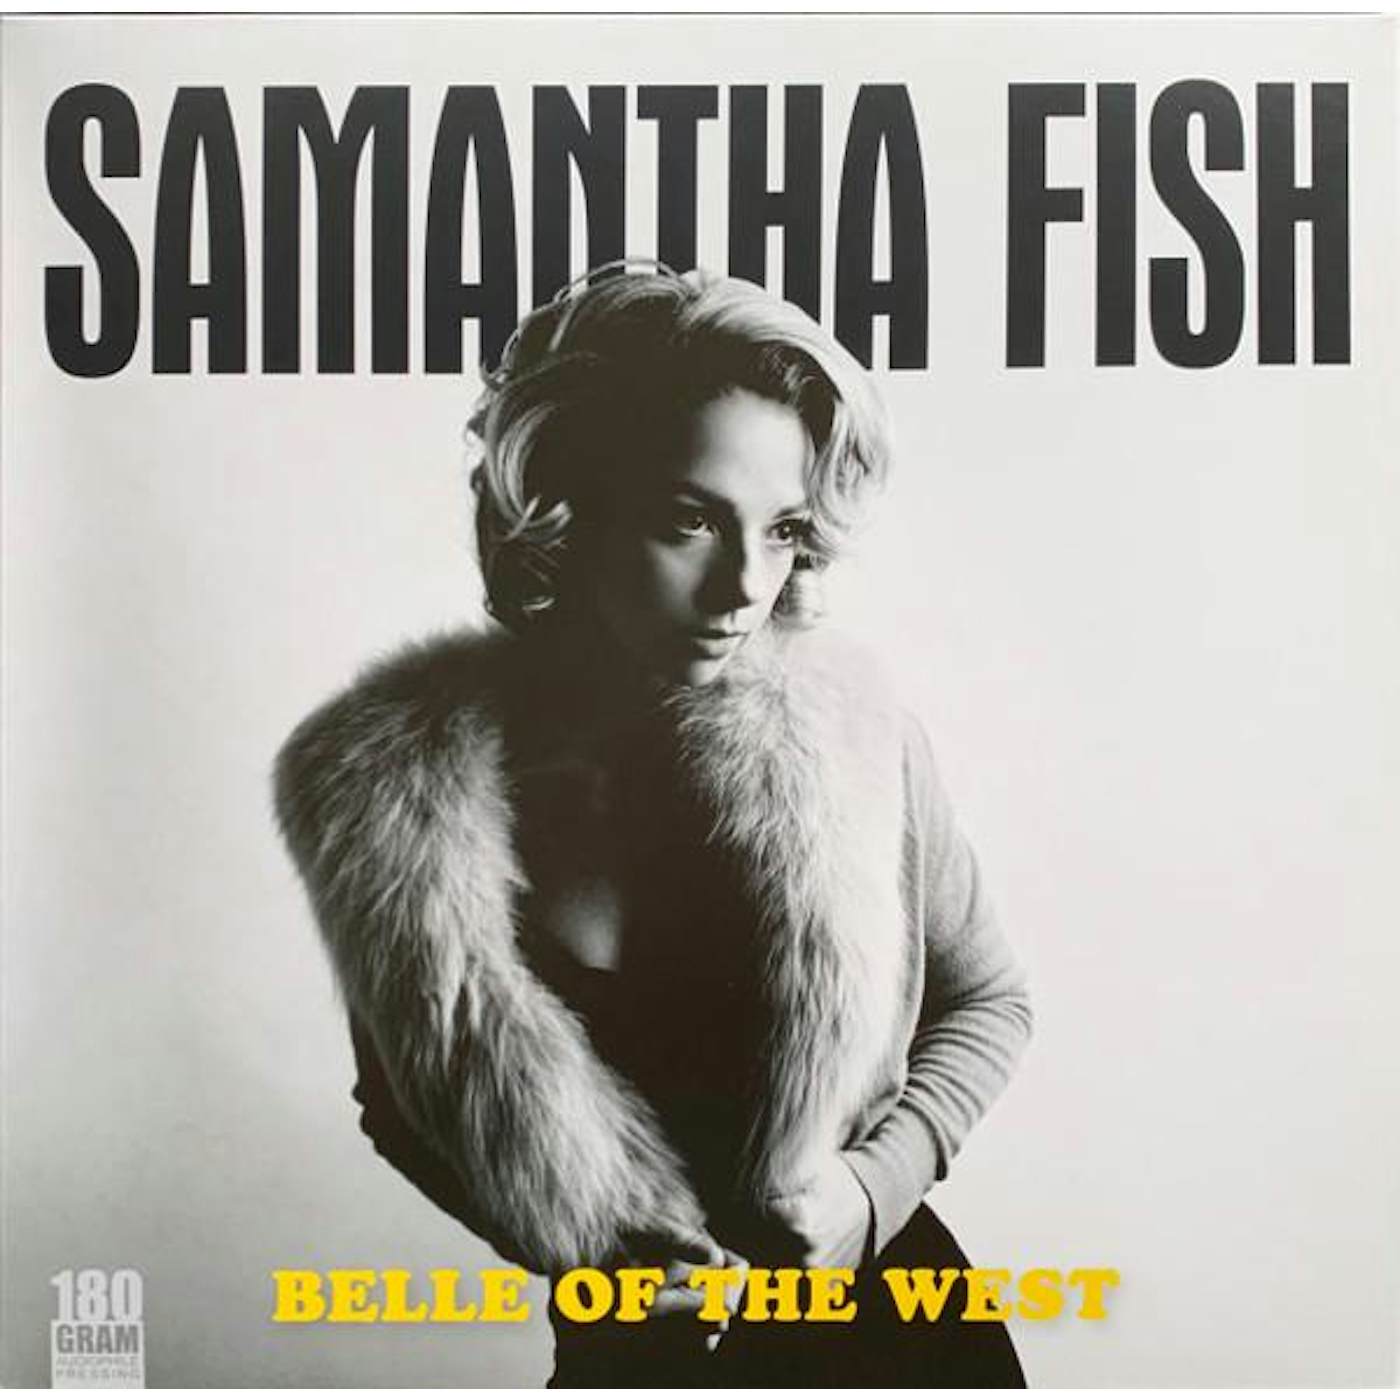 Samantha Fish BELLE OF THE WEST Vinyl Record